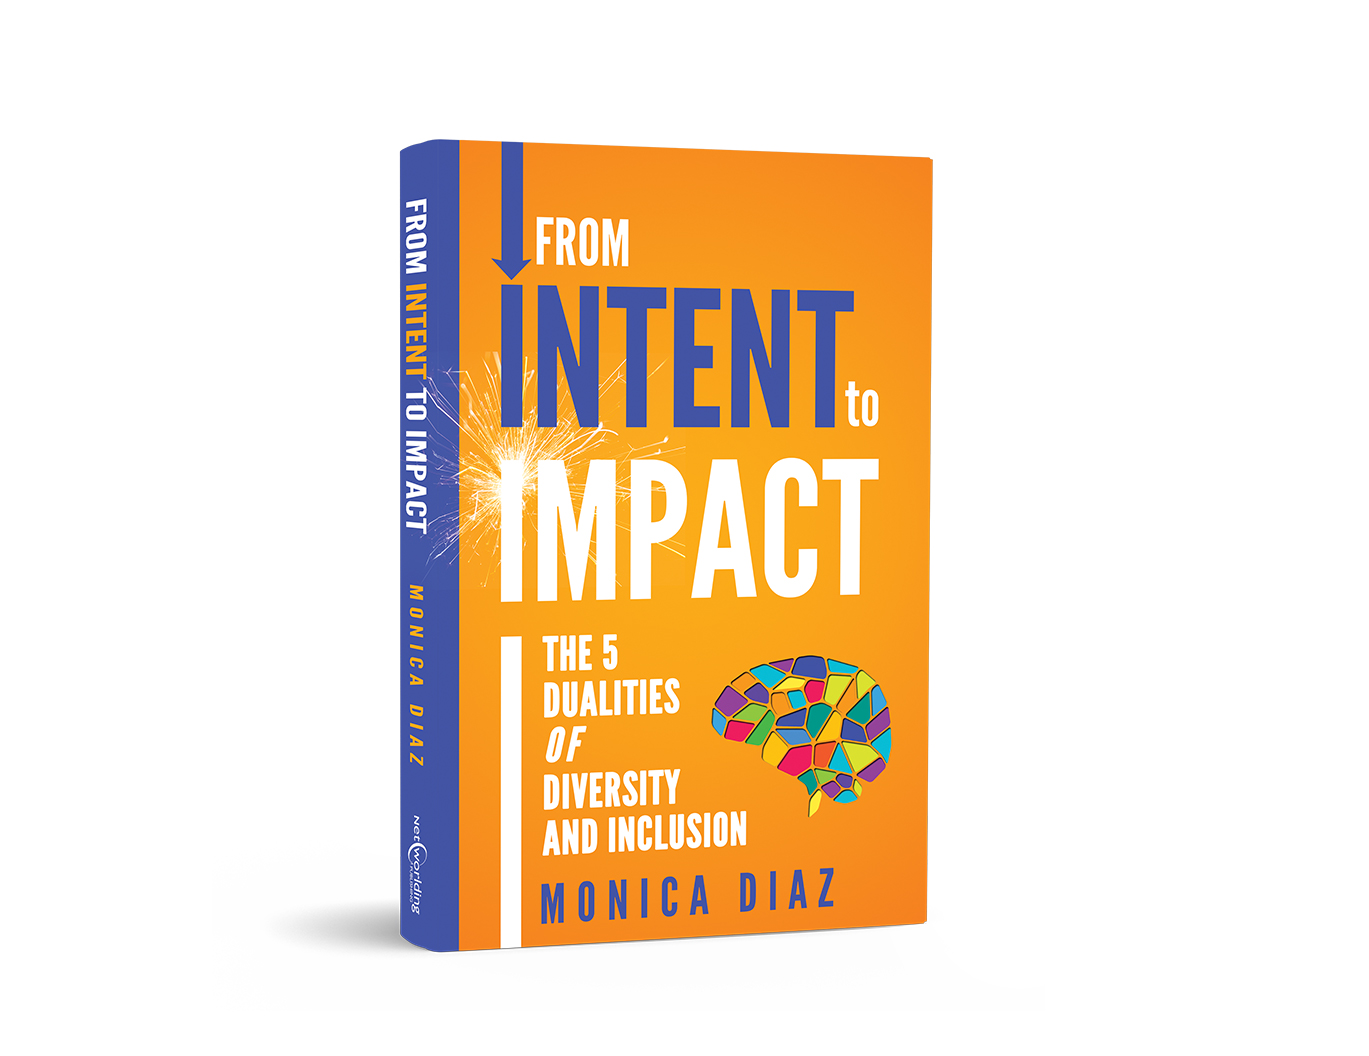 From Intent to Impact